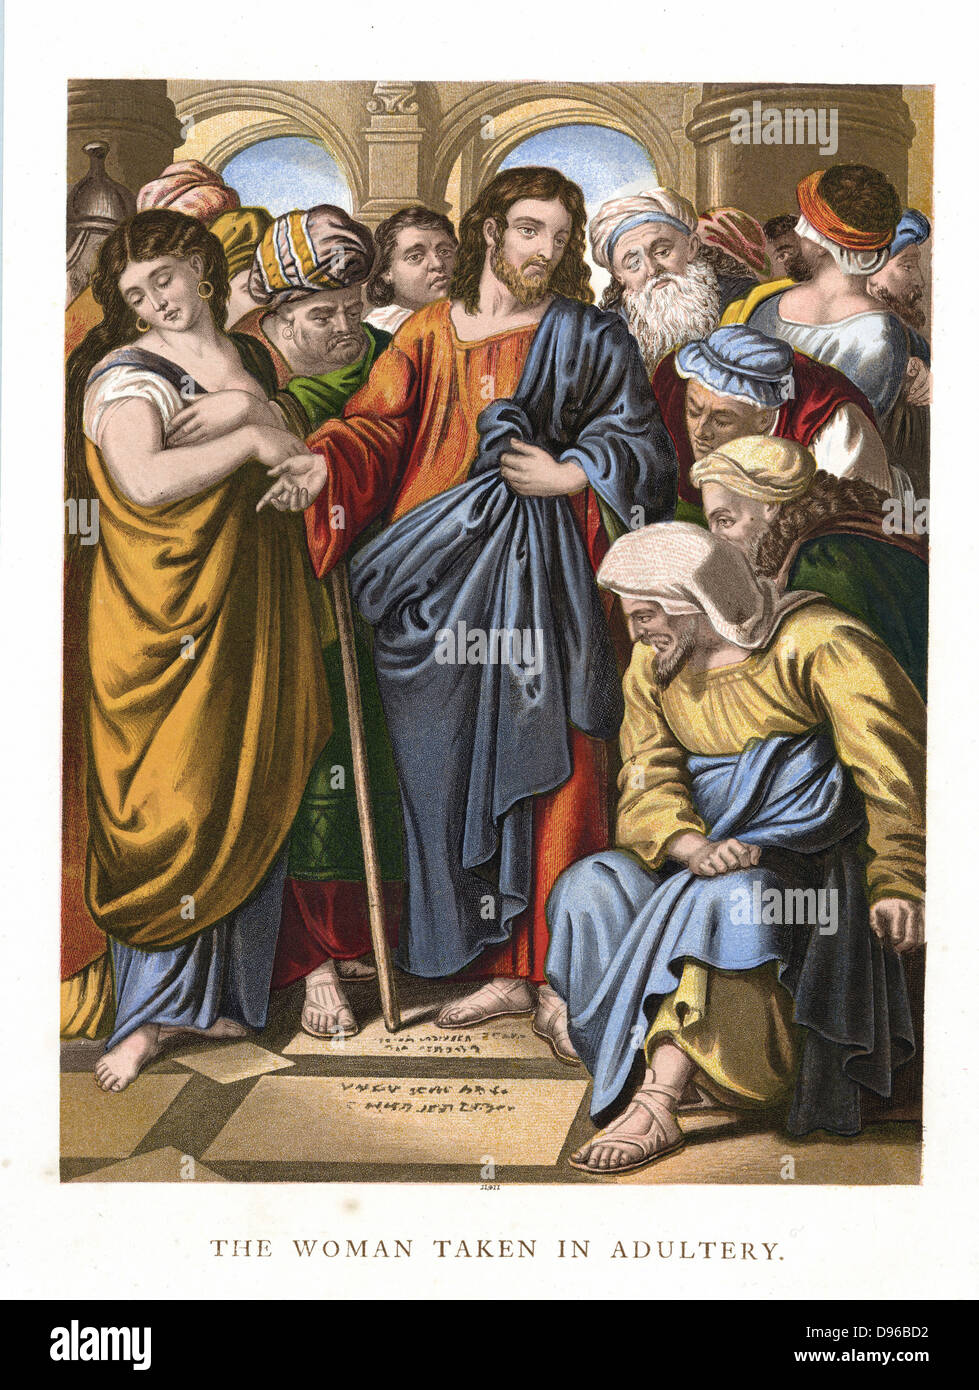 Jesus defending the woman taken in adultery against the Scribes and the Pharisees, saying: 'Let him that is without sin among you, first cast a stone at her'. John:8. Mid-19th century chromolithograph. Stock Photo